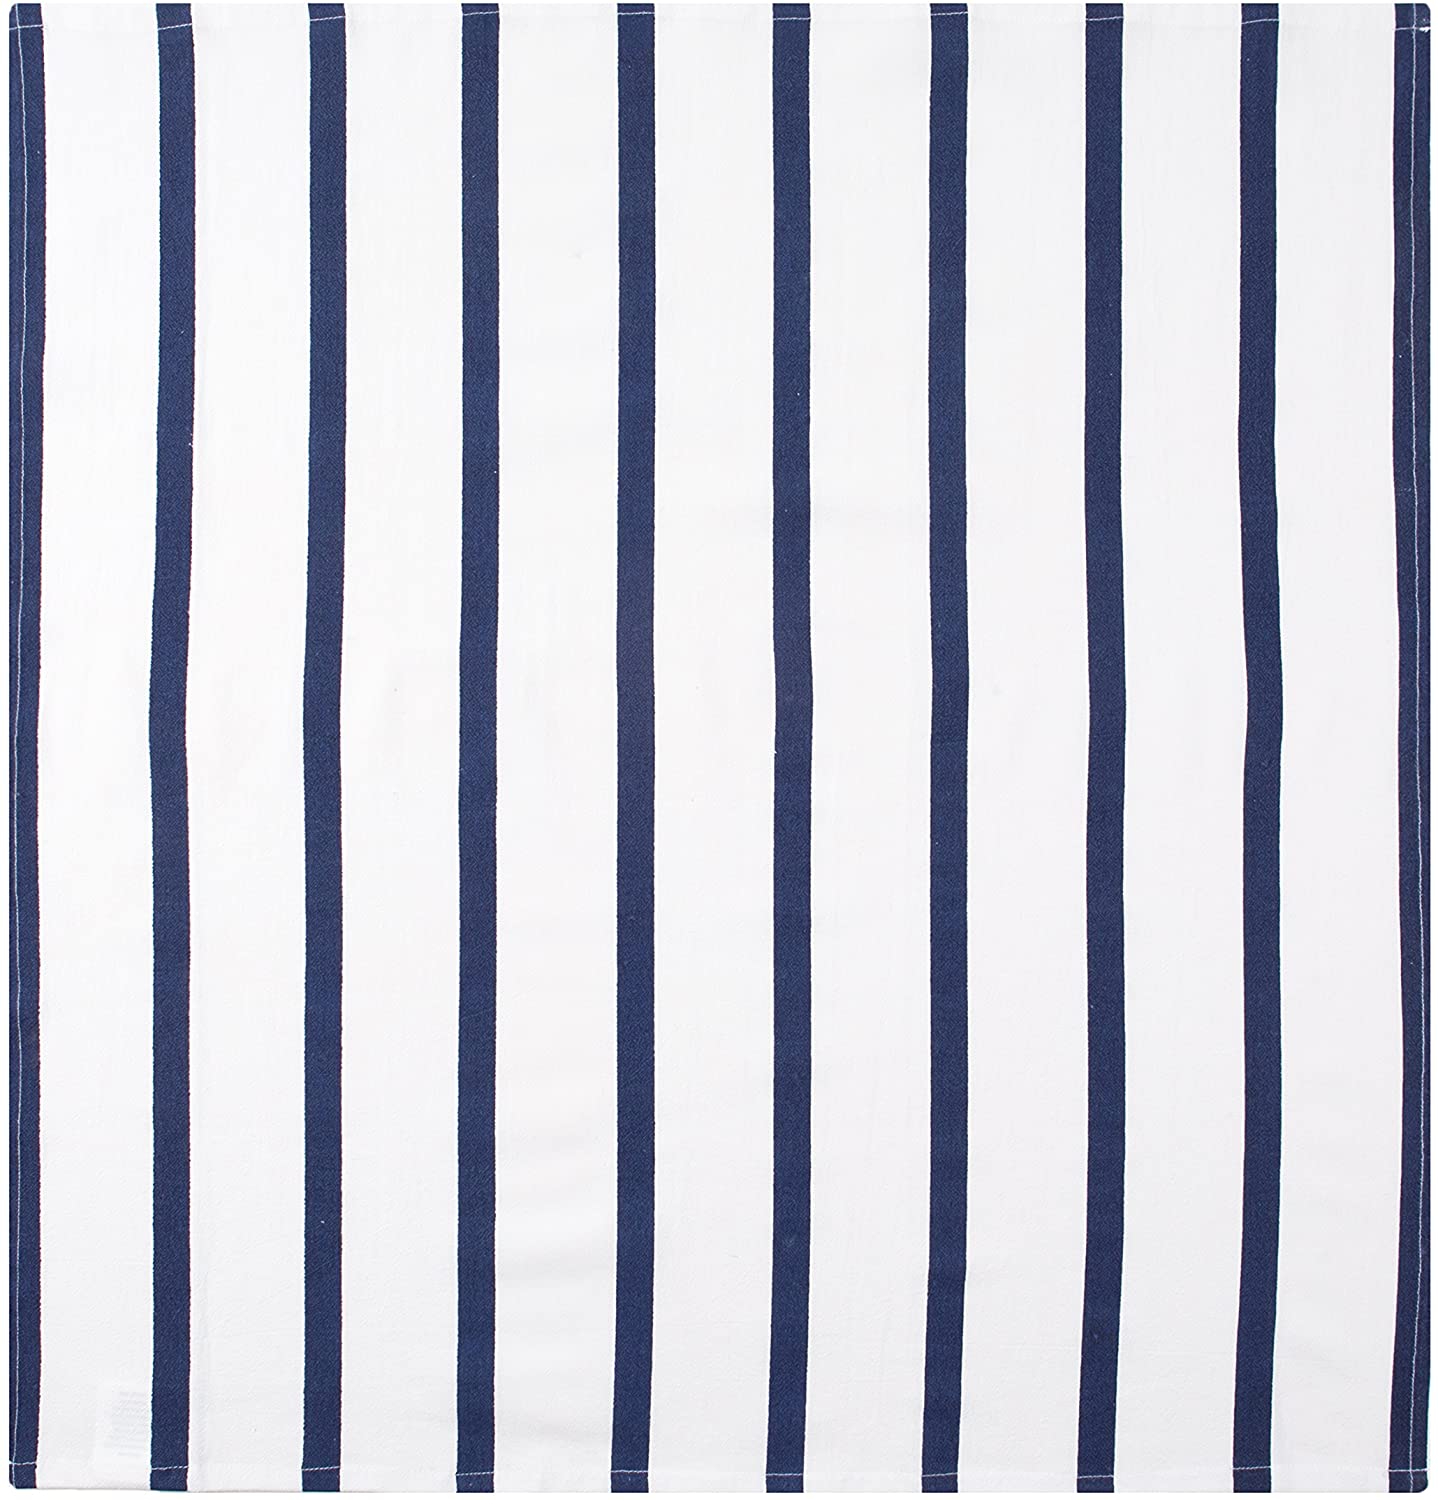 Sticky Toffee Cotton Flour Sack Kitchen Towels, Anchor and Stripe Nautical Prints, 3 Pack, 28 x 29